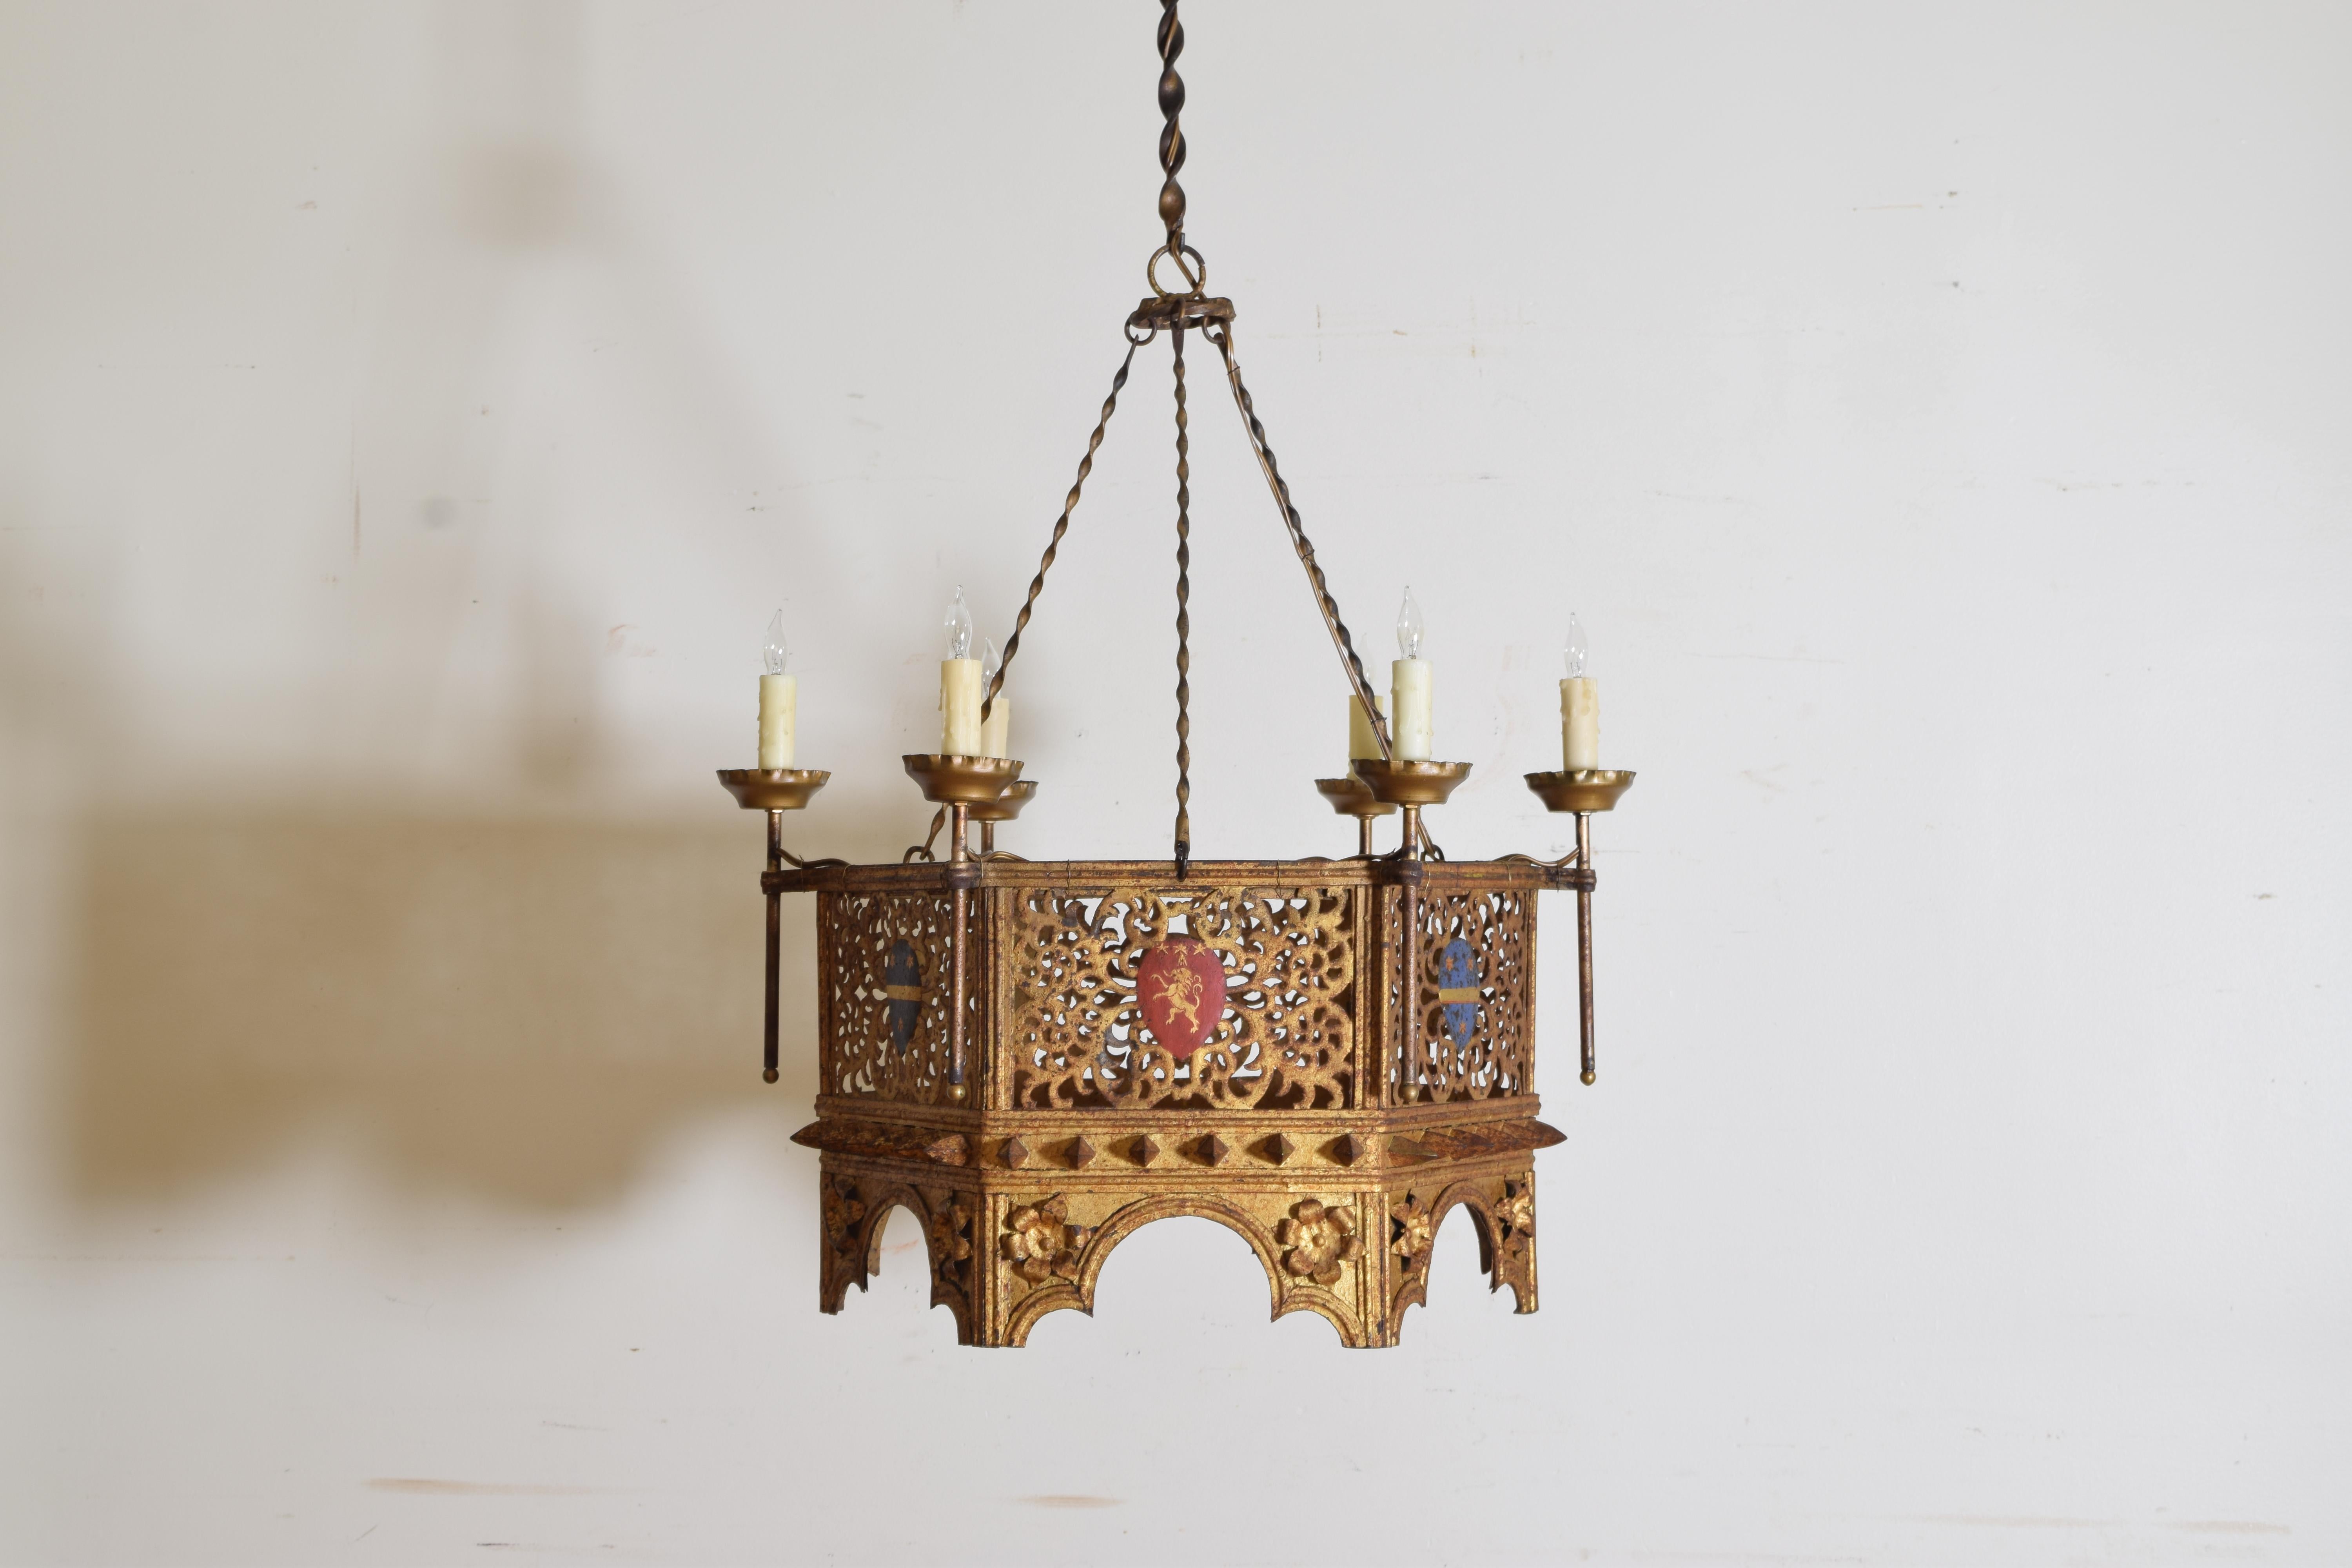 Hanging from a small canopy by twisted rods the hexagonal form with filigree style sides issuing elevated bobéches, each side with a centered and alternating red stemma with a gold ion or a blue stemma with a horizontal gold line and two stars above